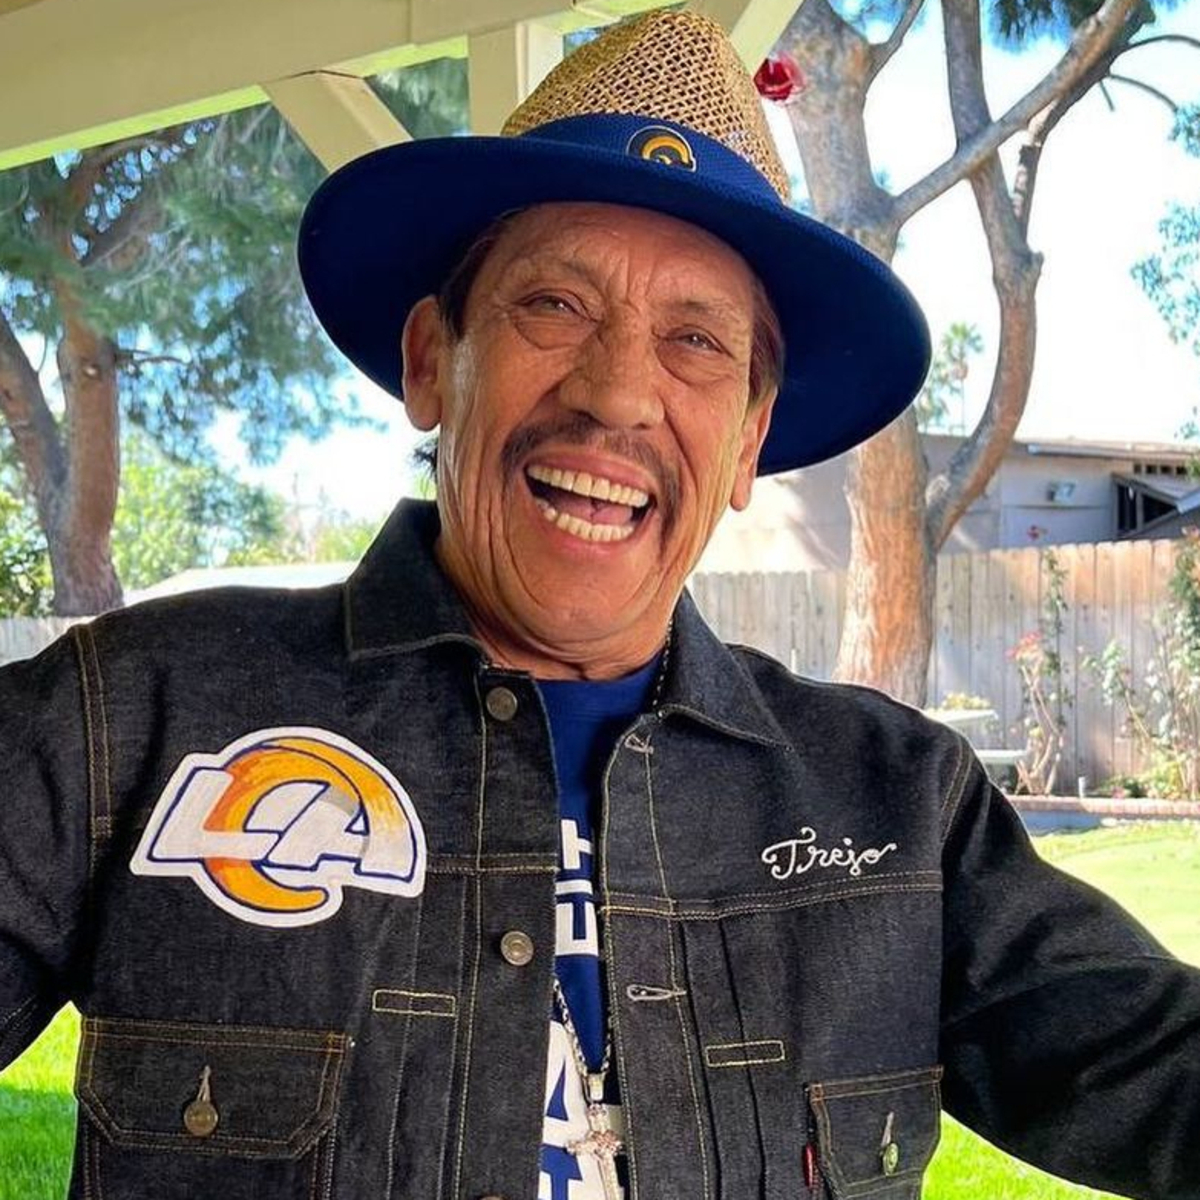 Danny Trejo Celebrates 55 Years of Sobriety With Inspirational Message